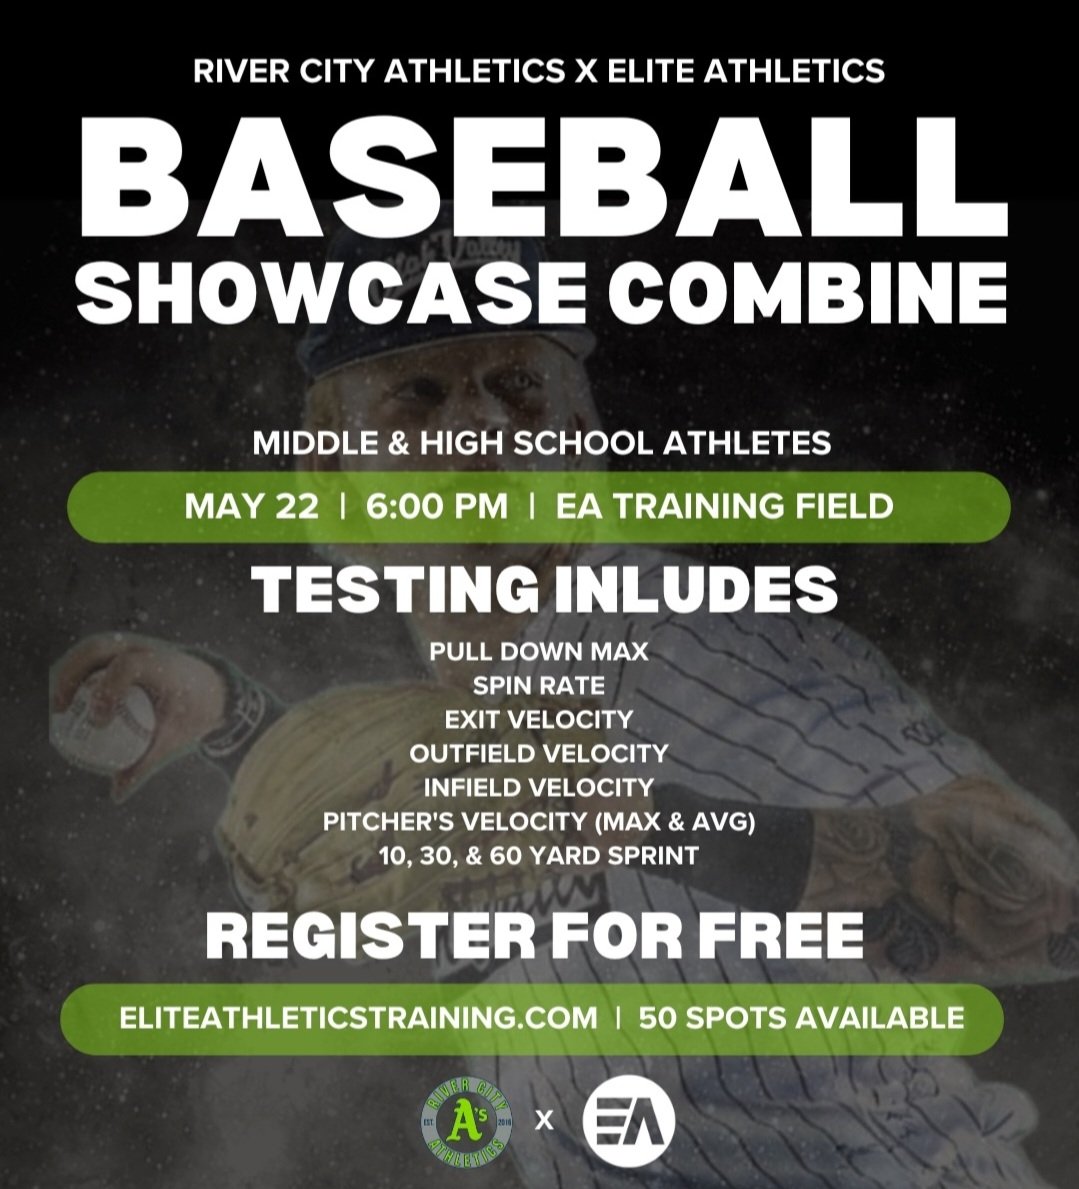 Area players, find out what your numbers are for free. No reason to pay hundreds of dollars for information you can get for free, sign up and get better.